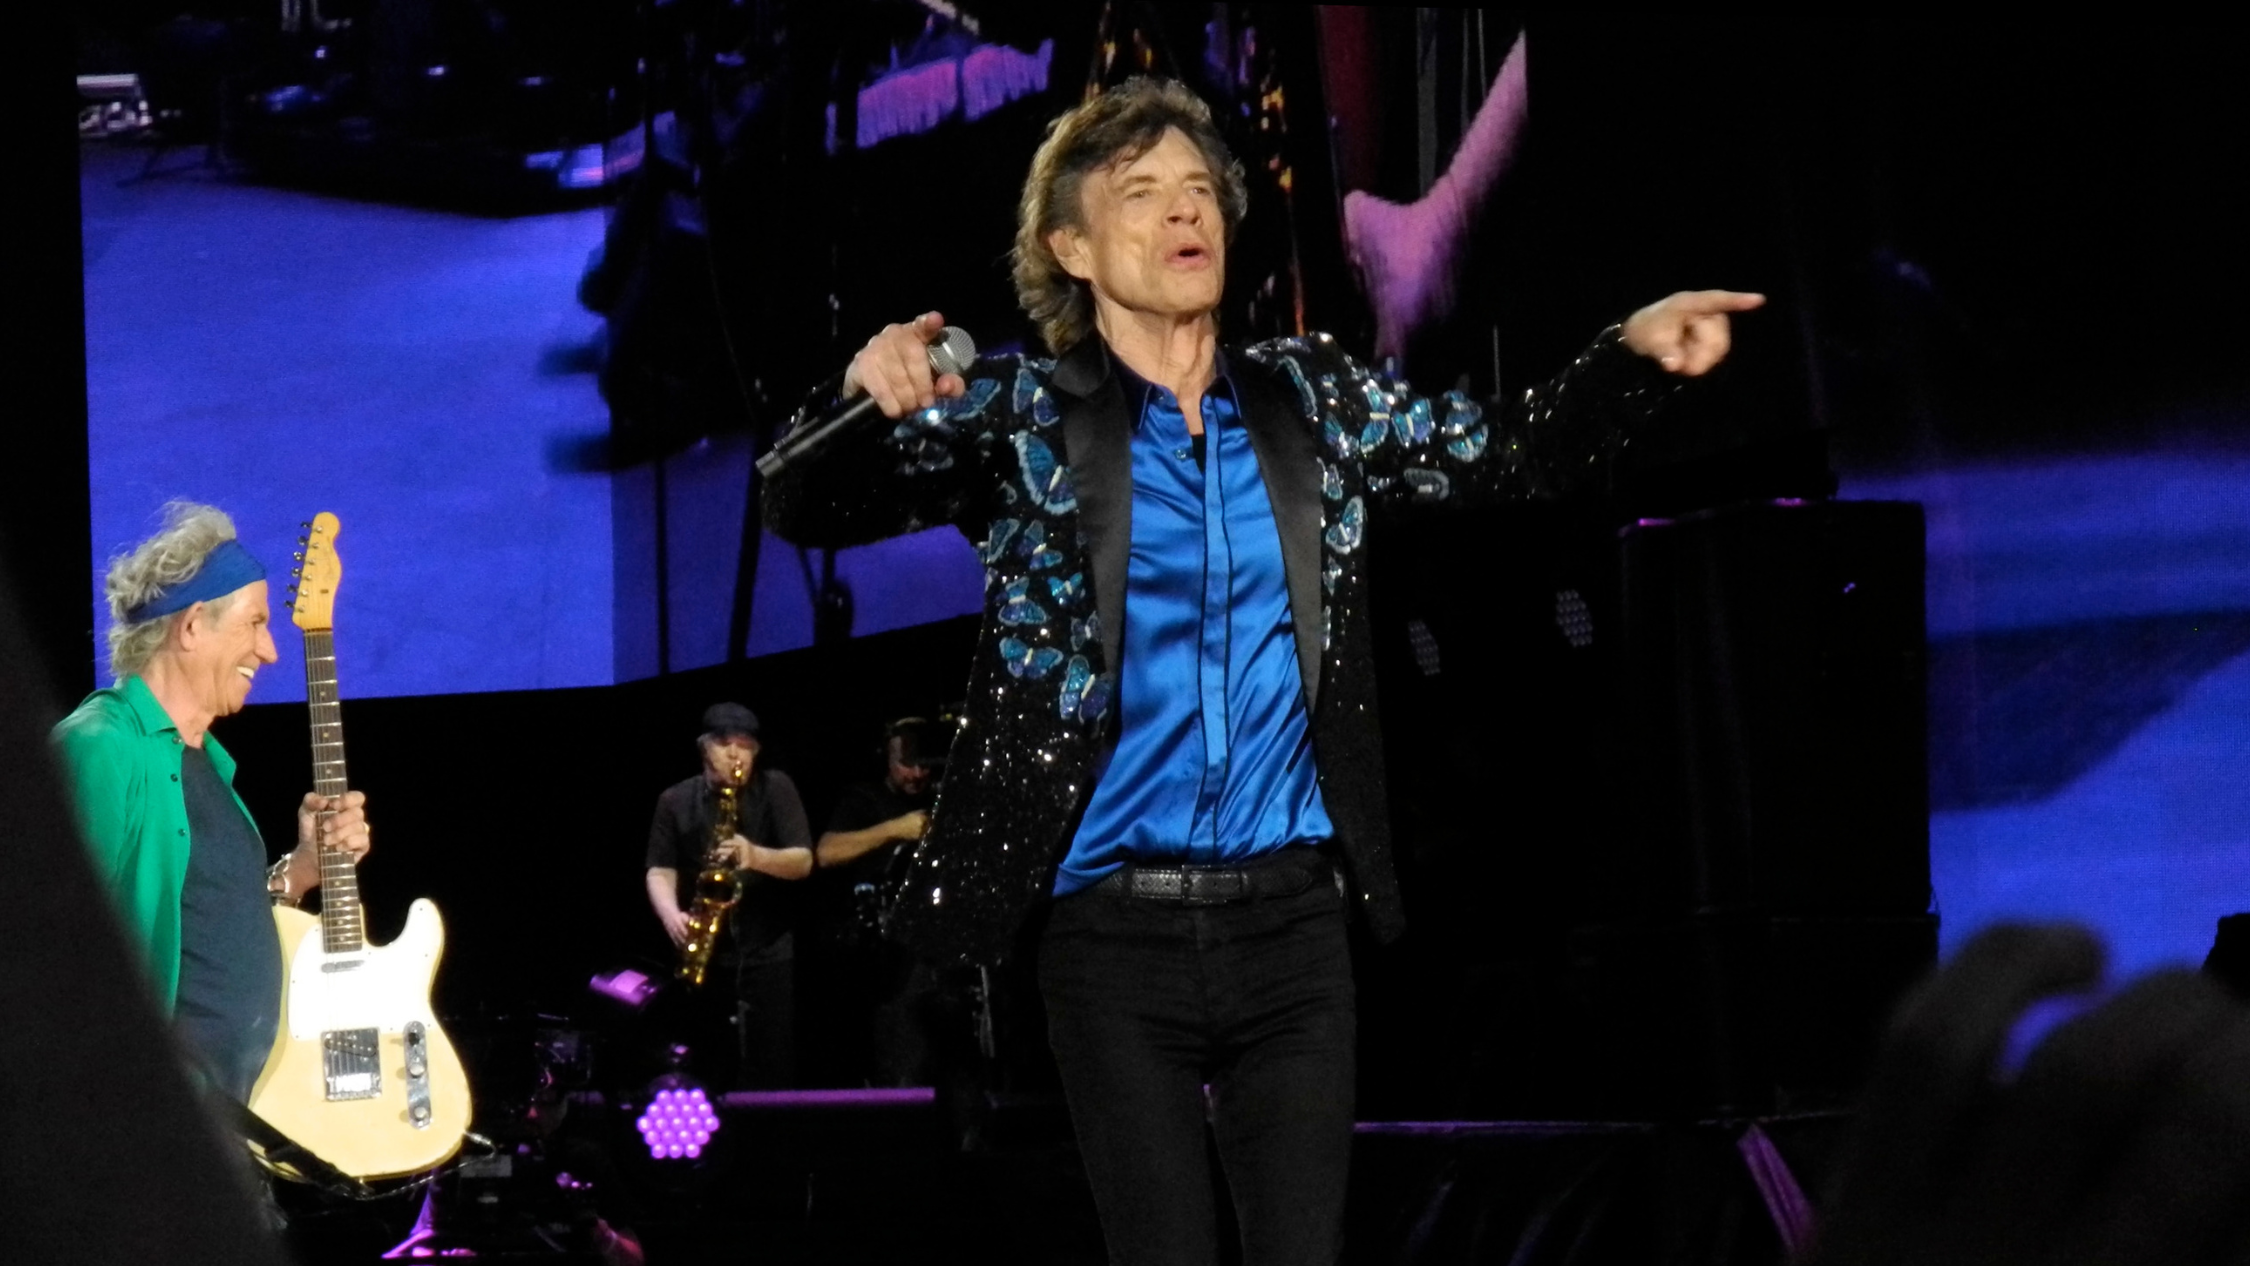 The Rolling Stones release new album for the first time in almost 20 years